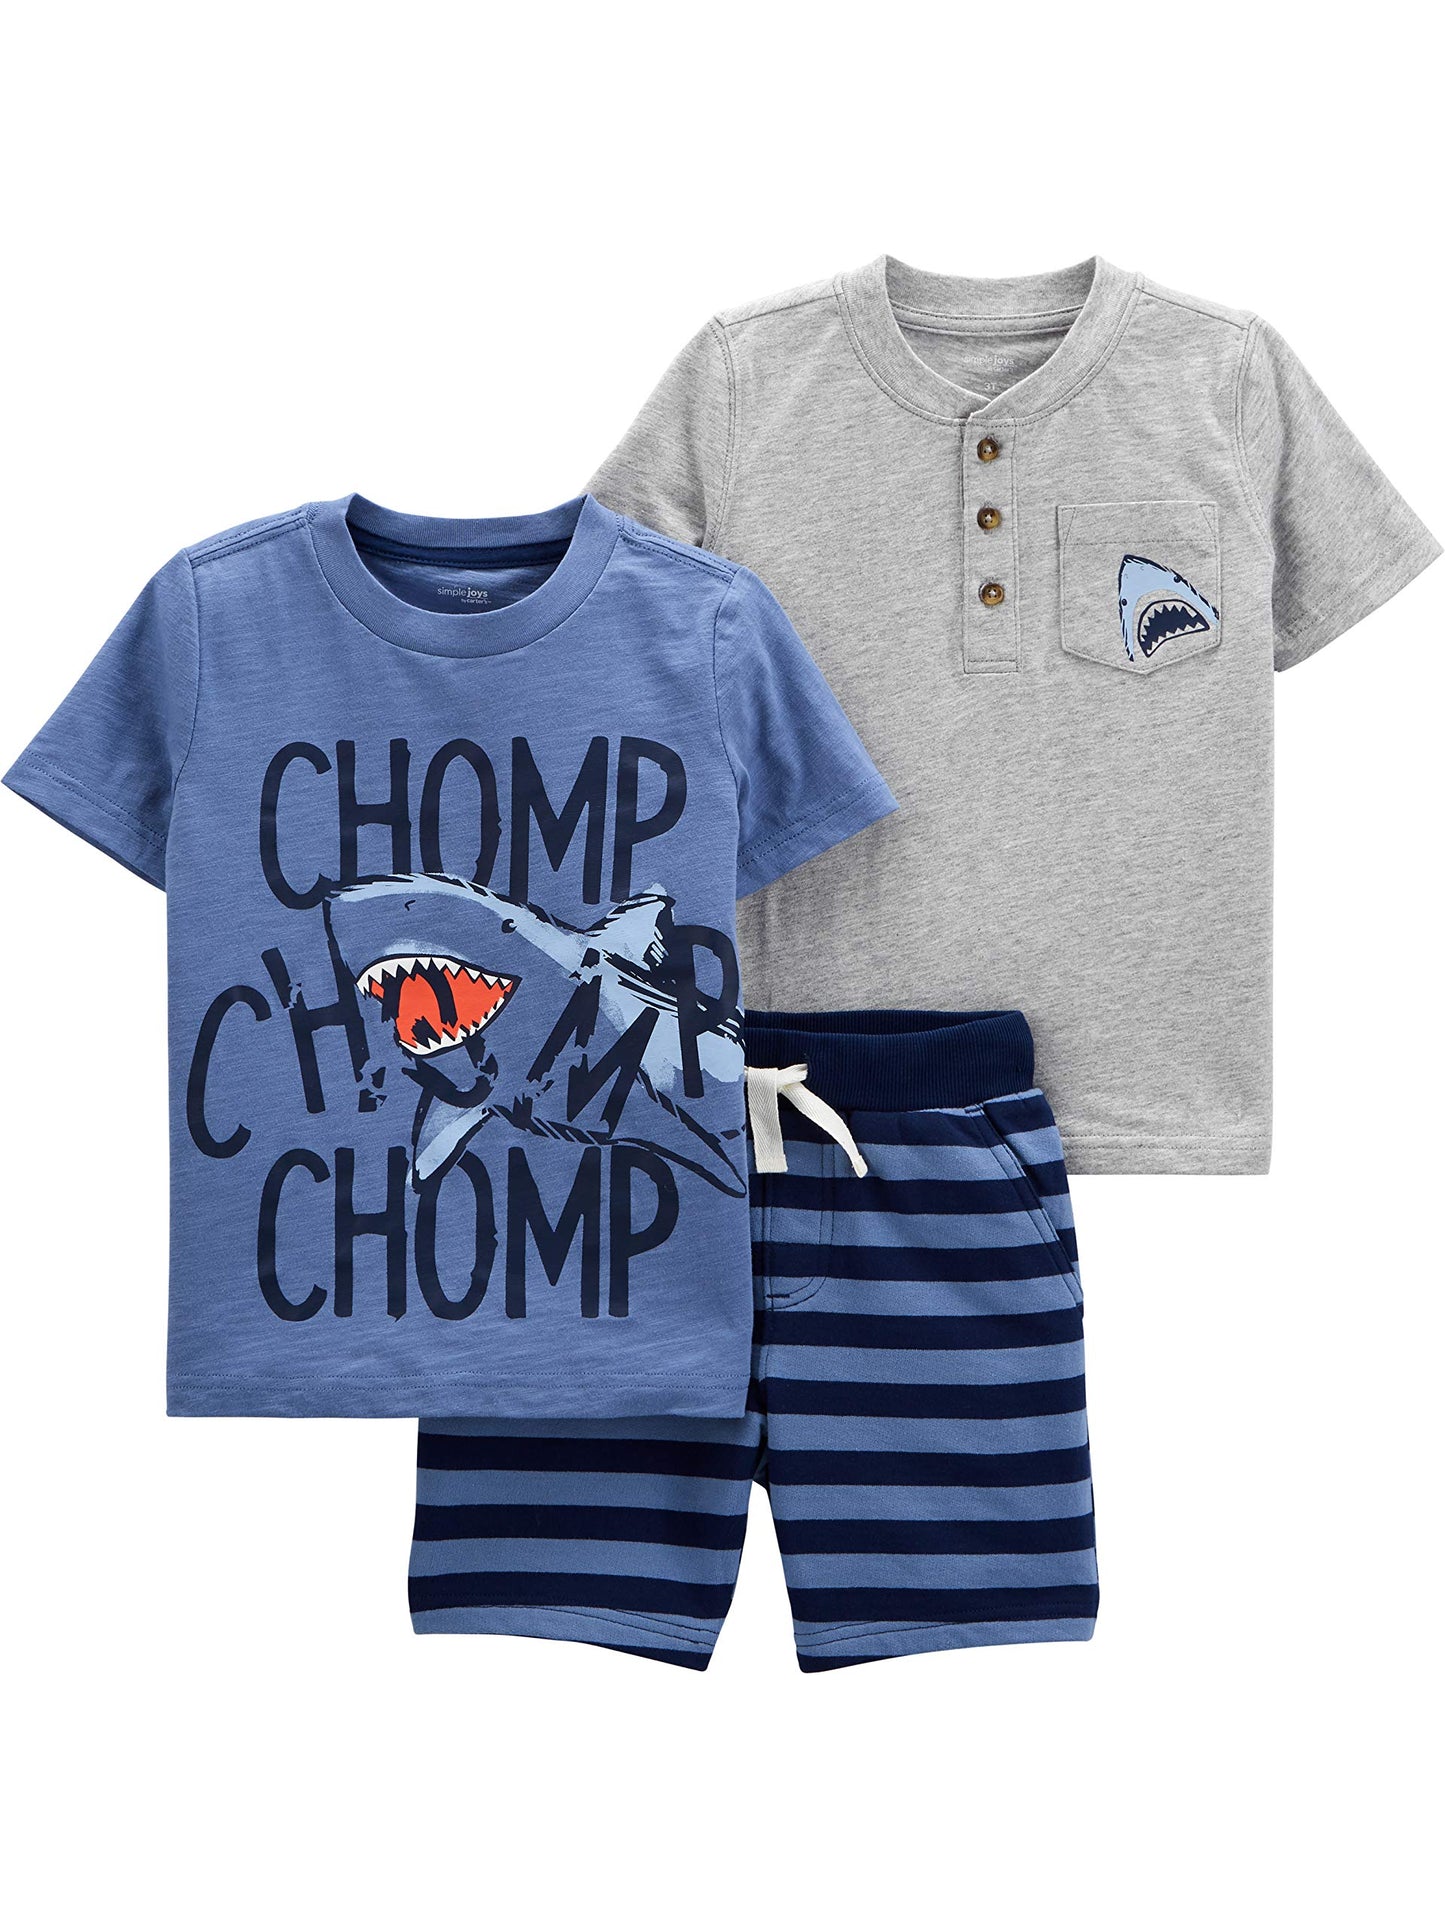 Simple Joys by Carter's Toddlers and Baby Boys' 3-Piece Playwear Set 12M